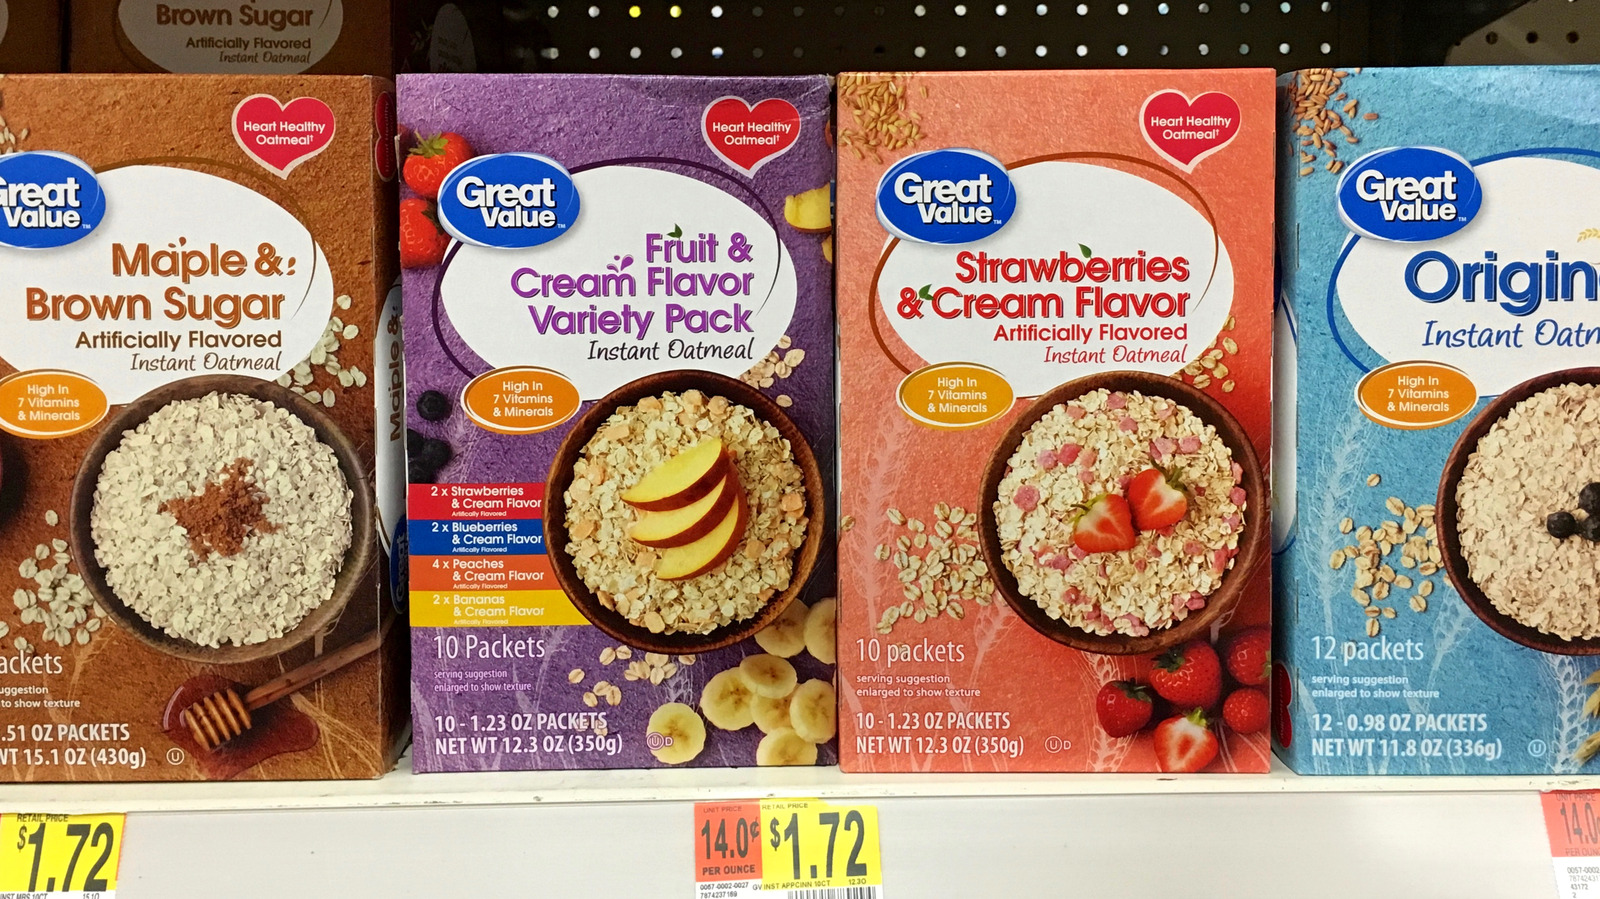 Generic vs Name Brand Foods - Is there really a difference?